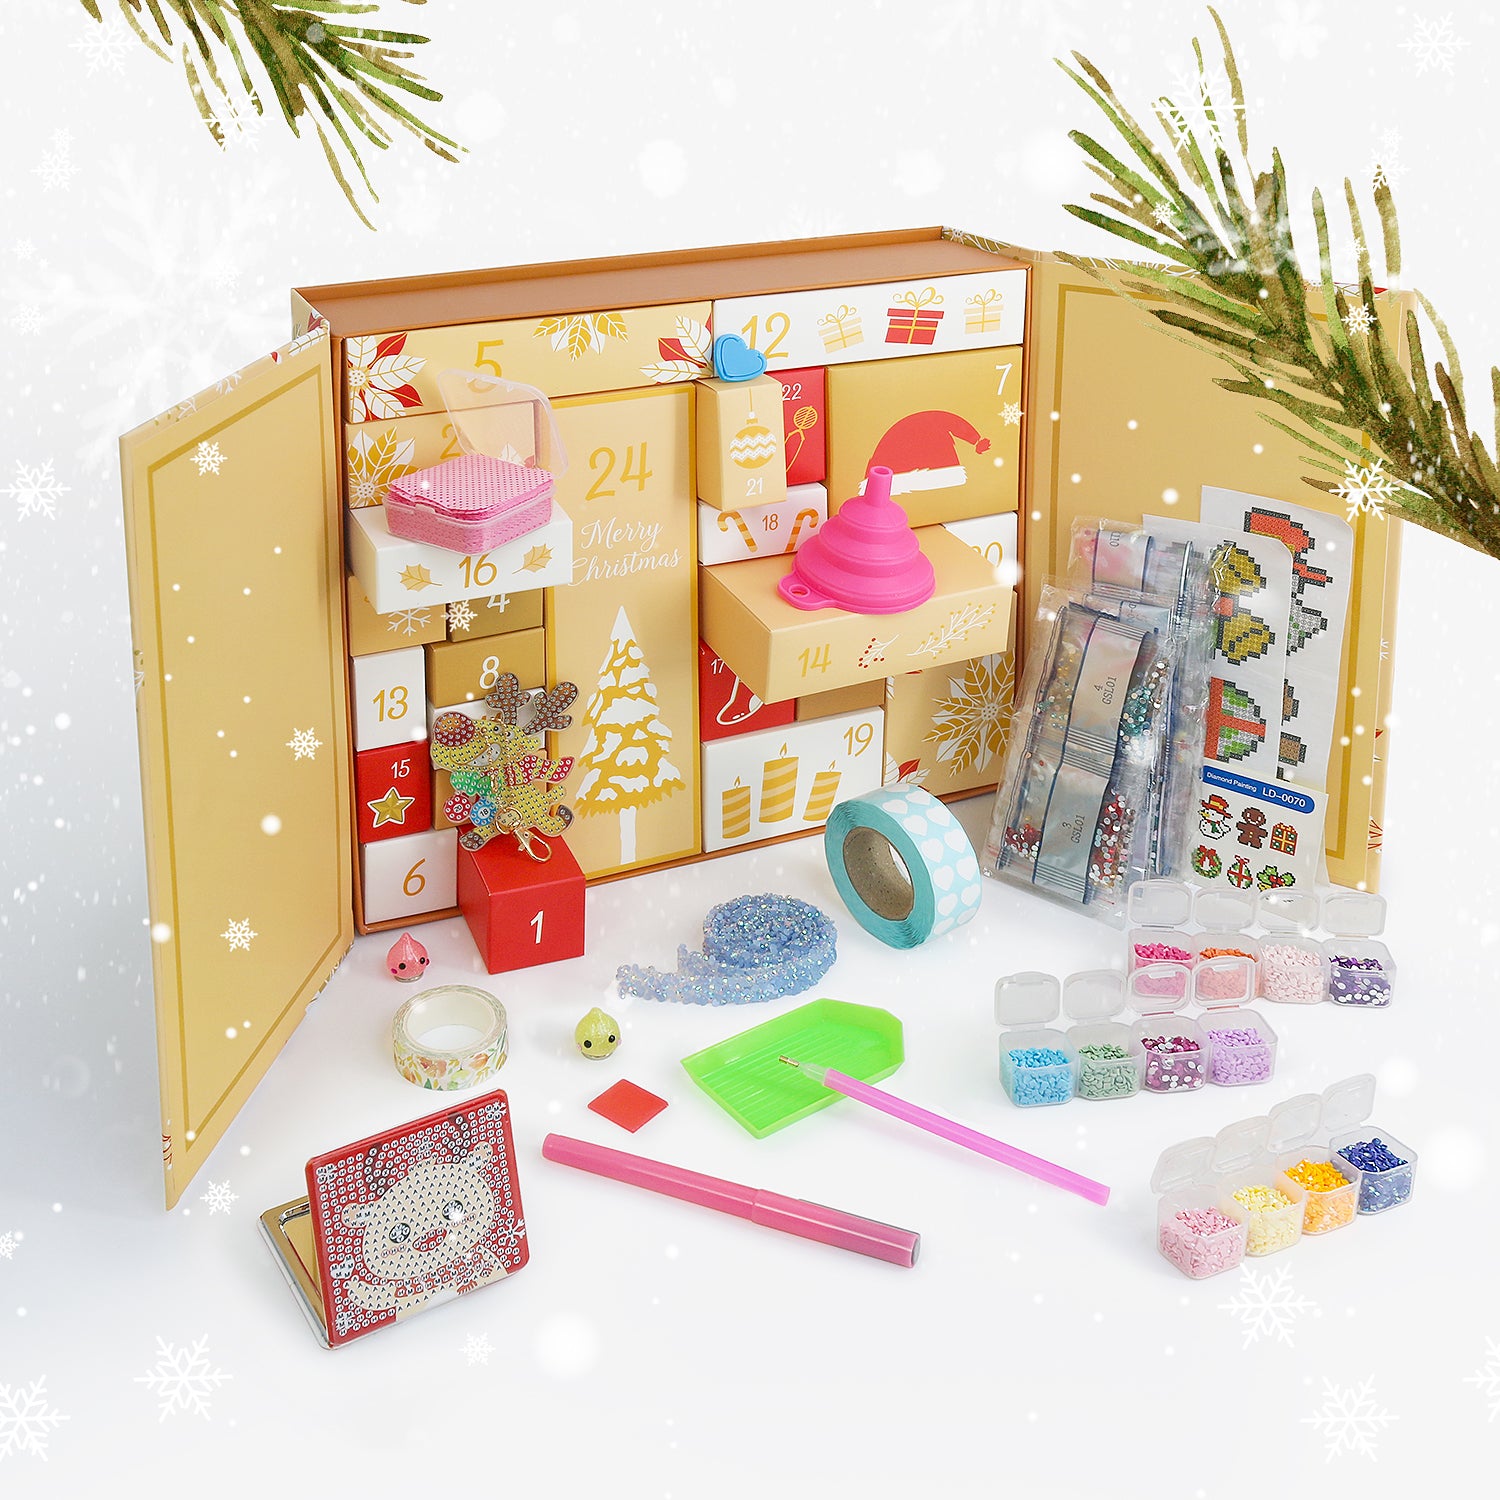 Best Selling Christmas Diamond Painting Kits – Home Craftology